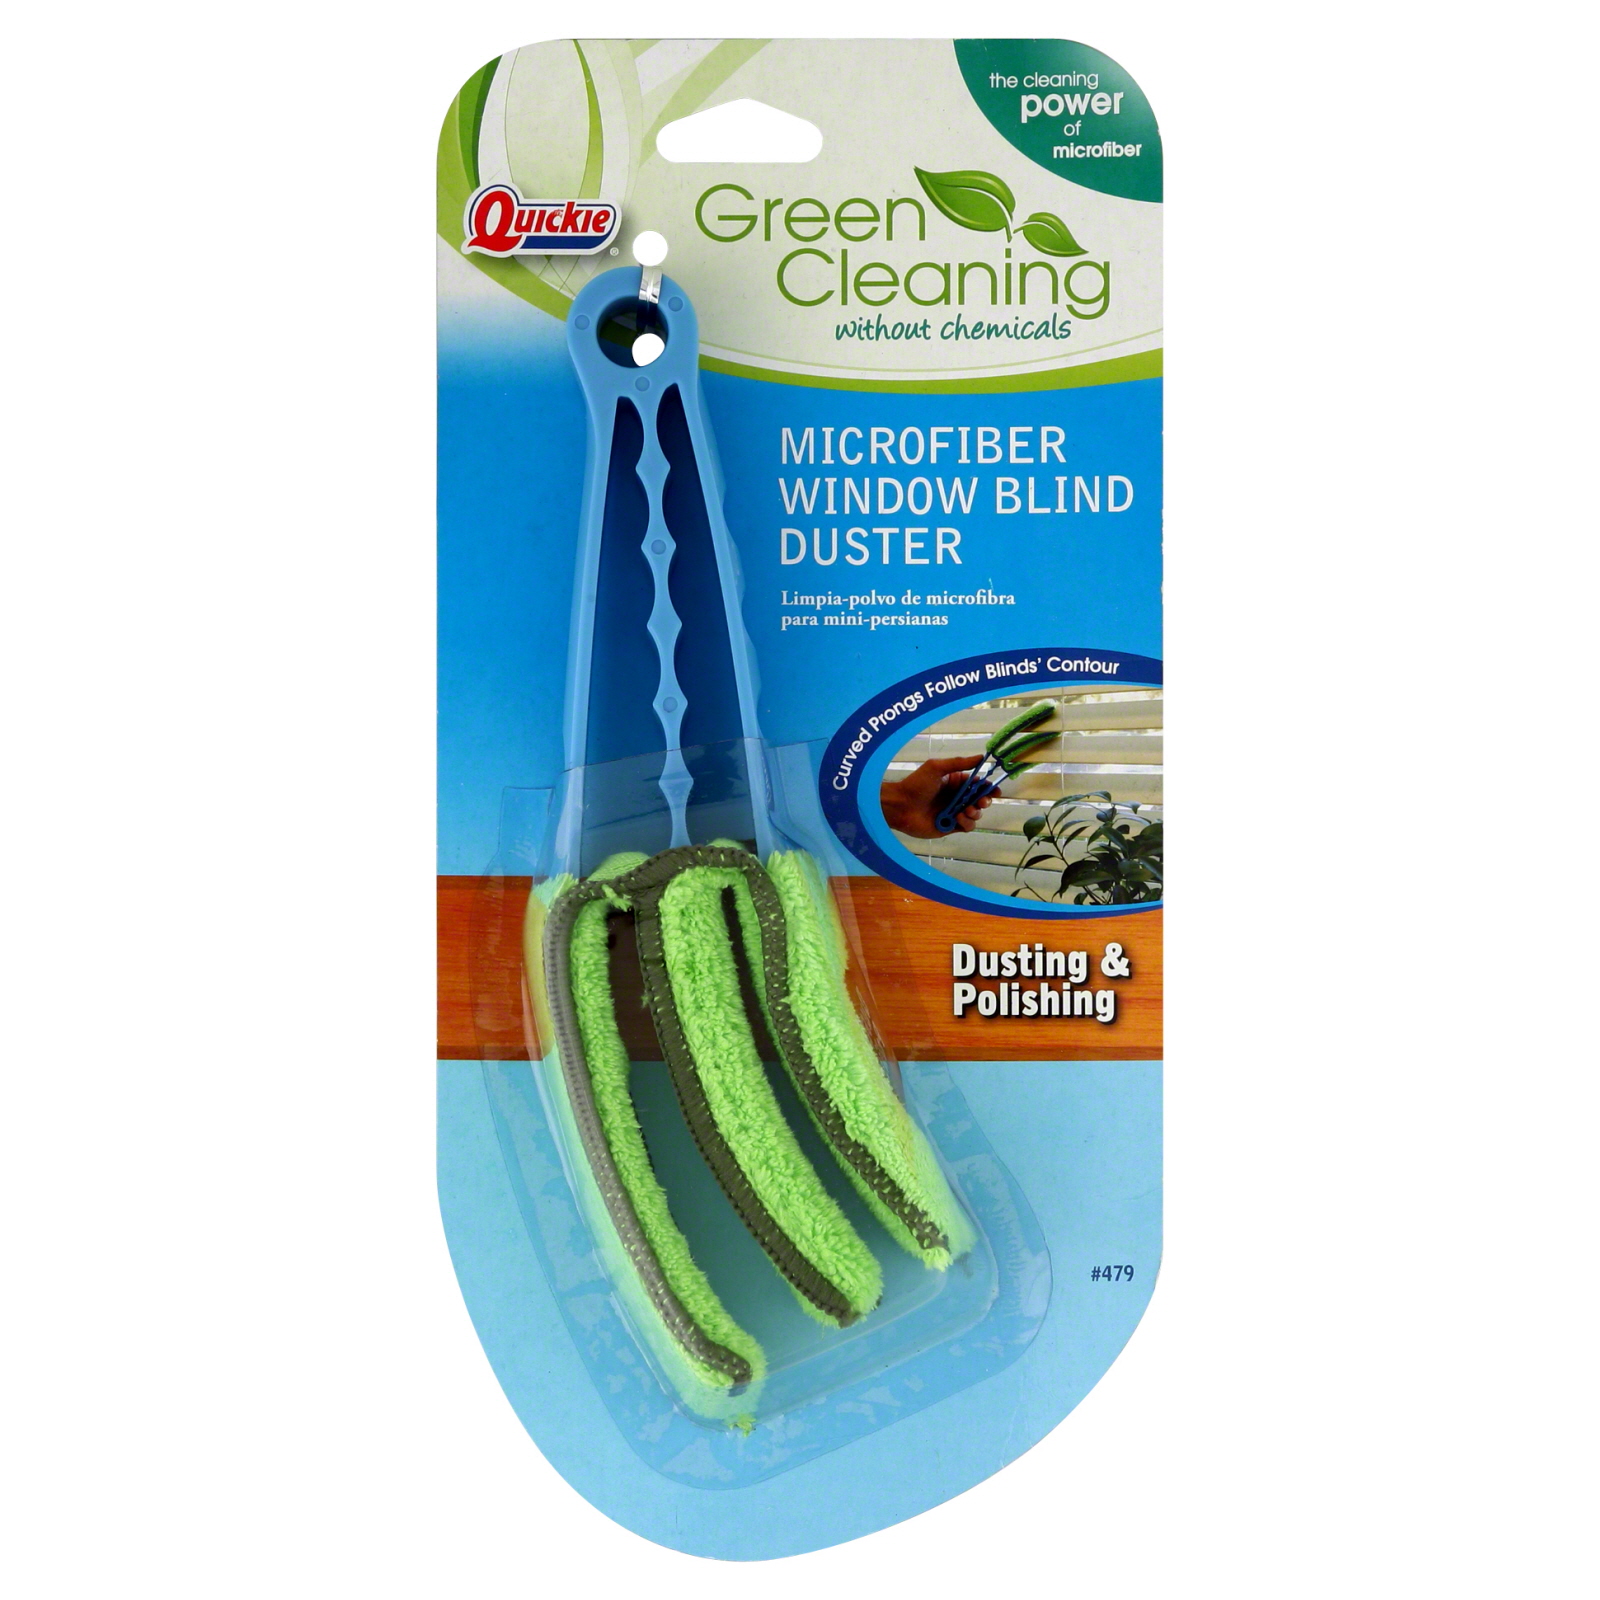 Quickie Green Cleaning Duster Microfiber Window Blind